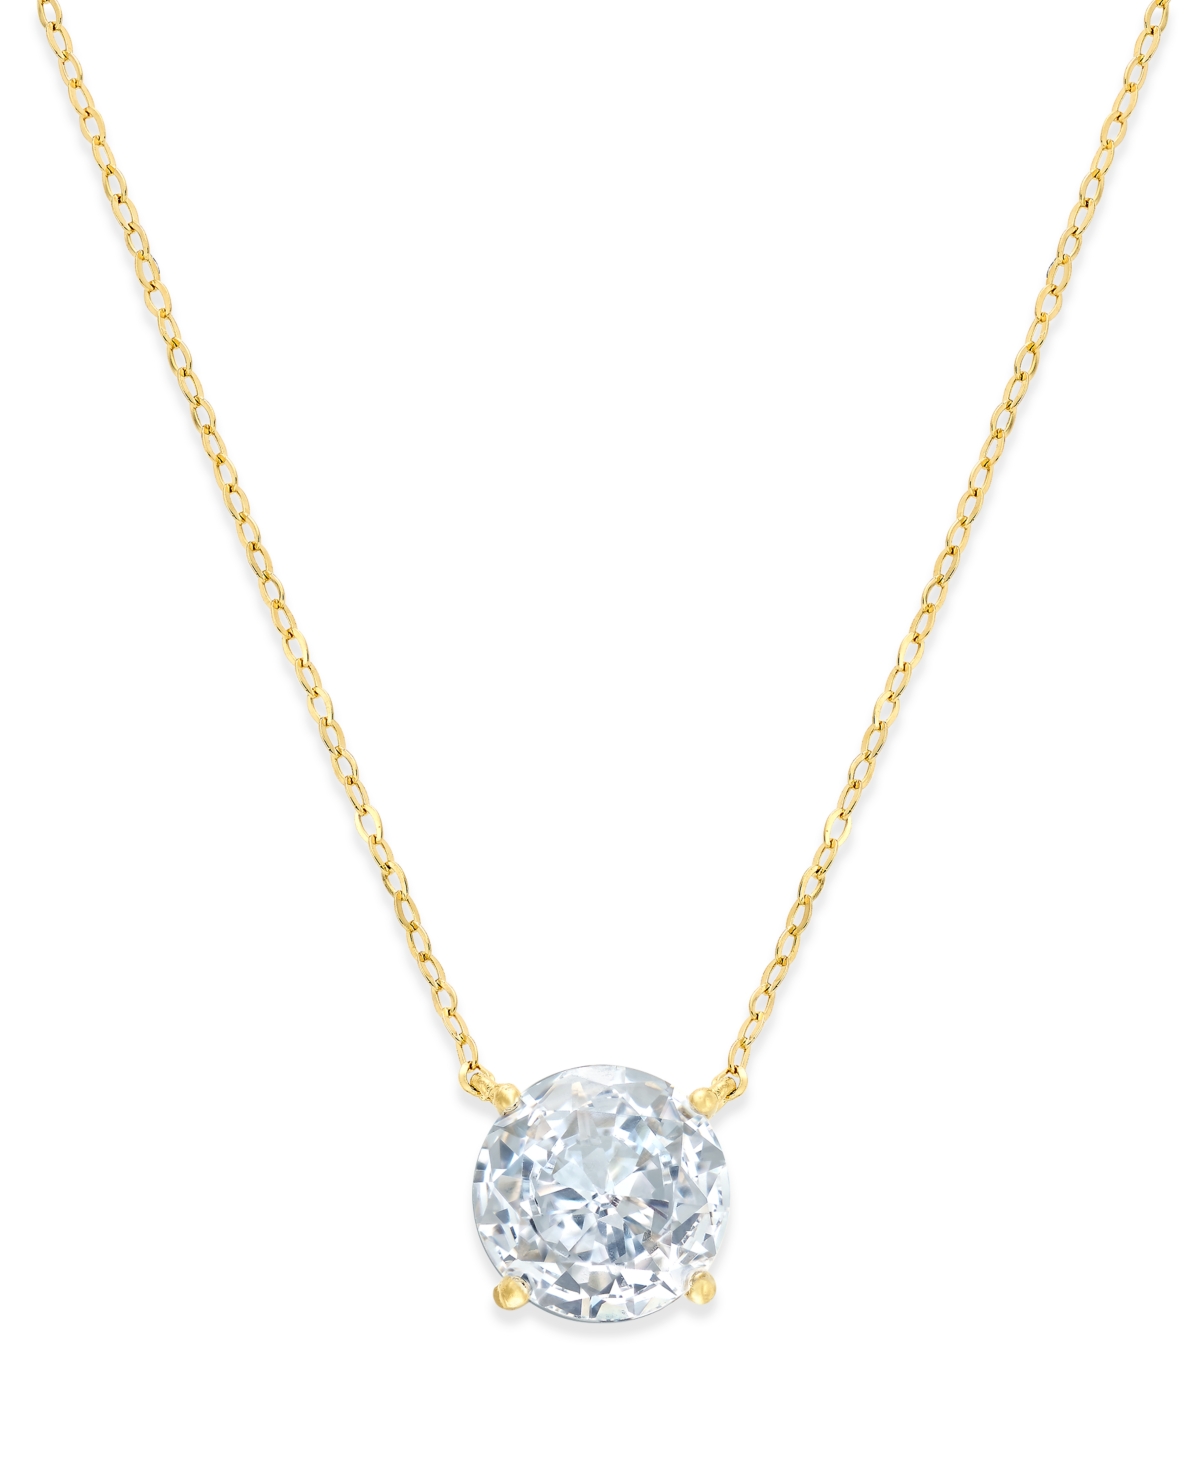 18k Gold-Plated Crystal Pendant Necklace, Created for Macy's - Gold